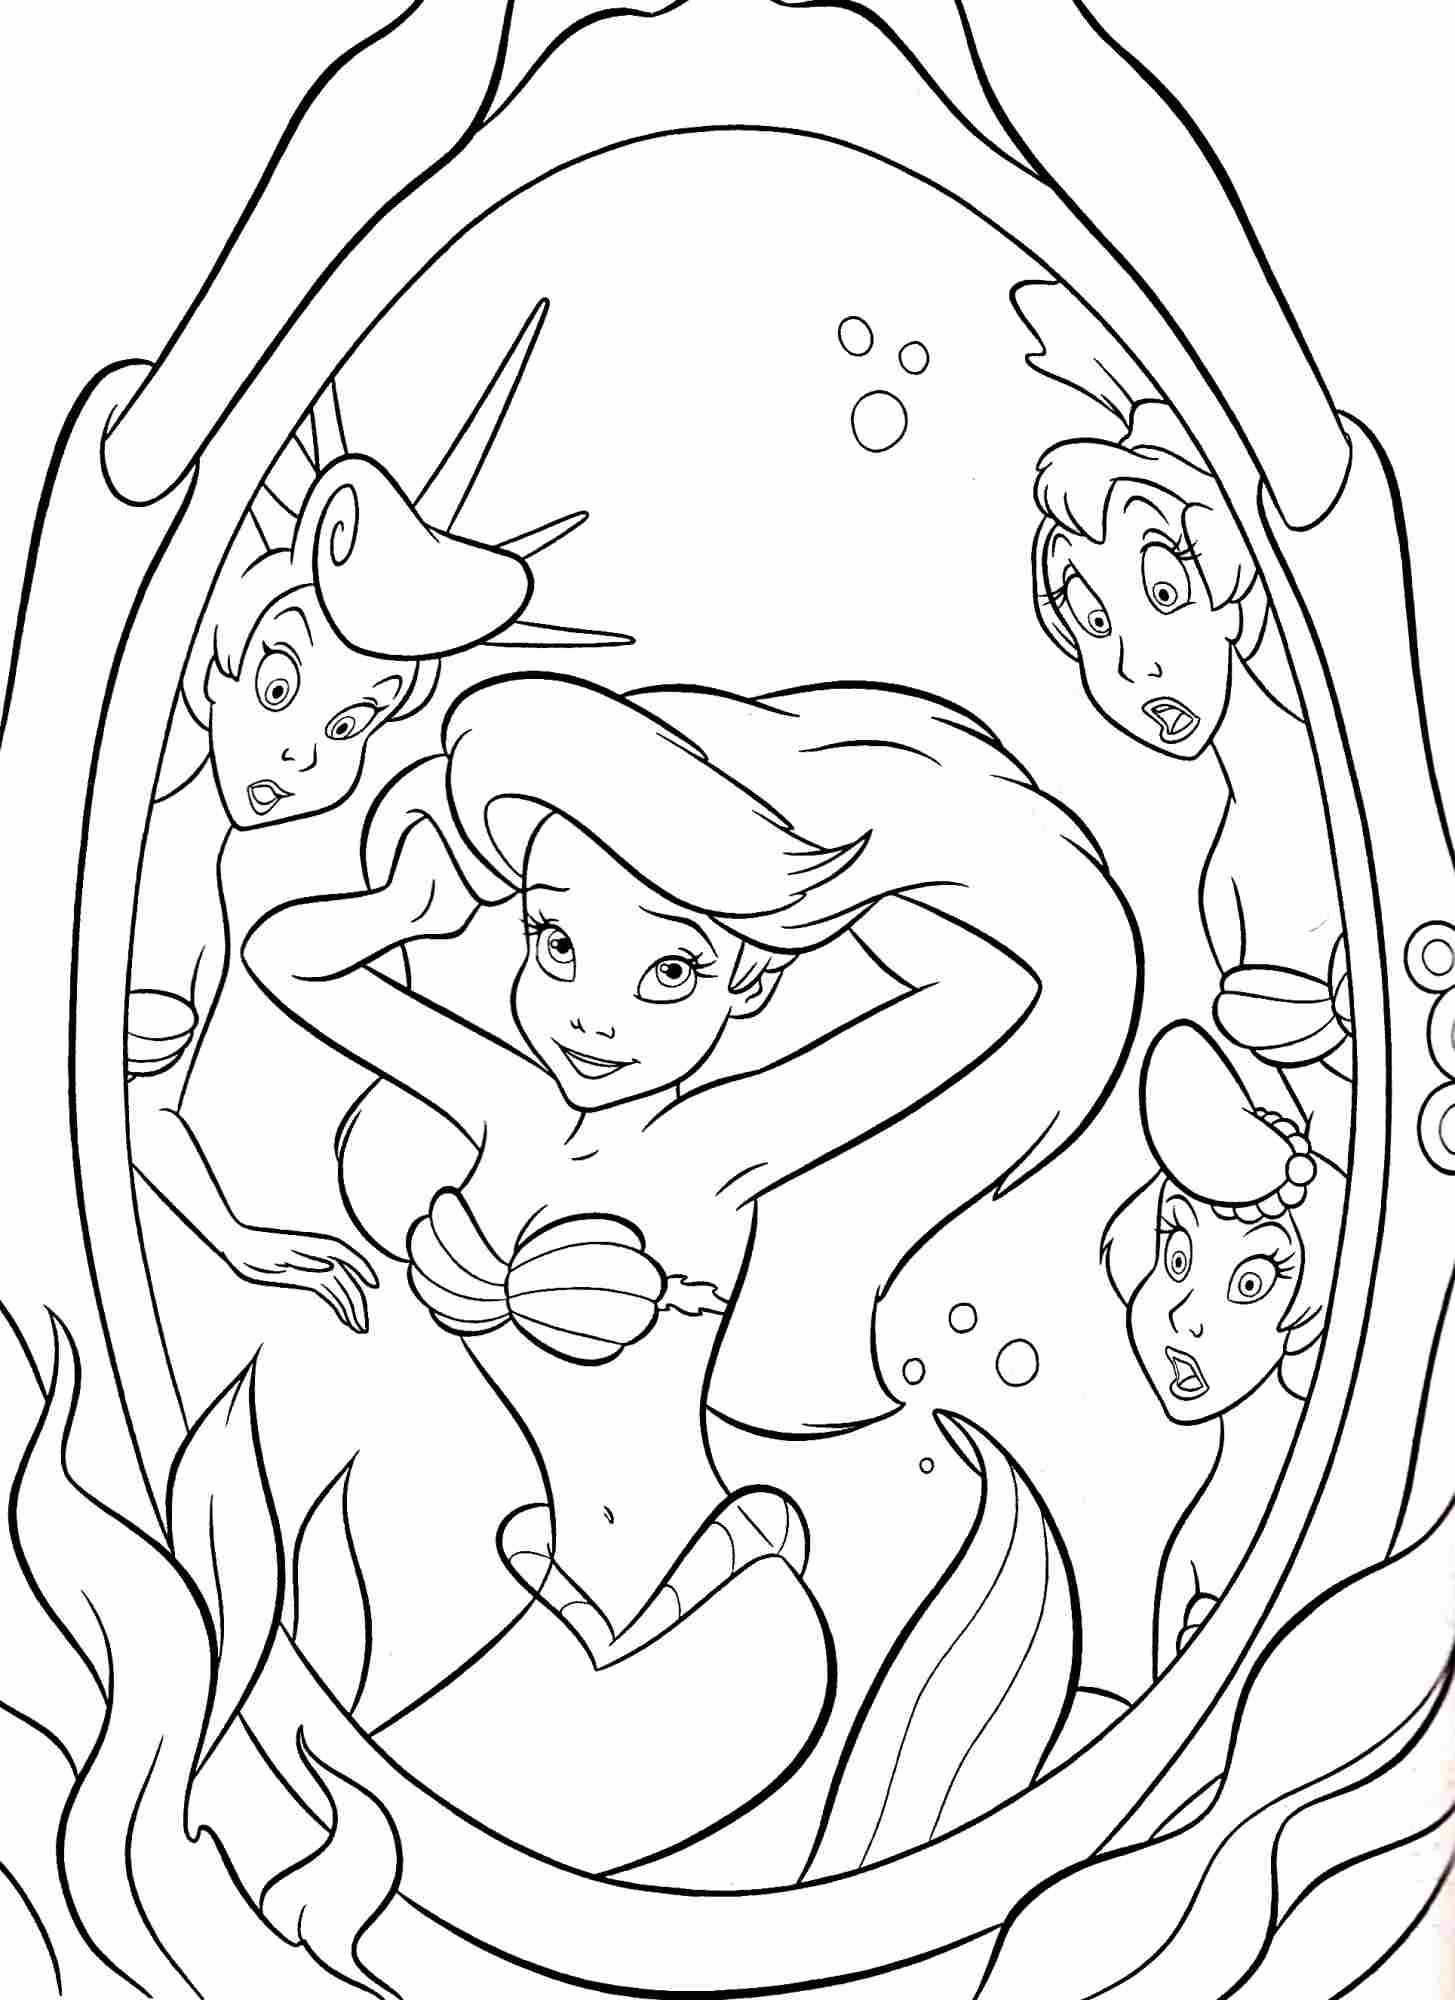 Little Mermaid Coloring Pages | Forcoloringpages.com